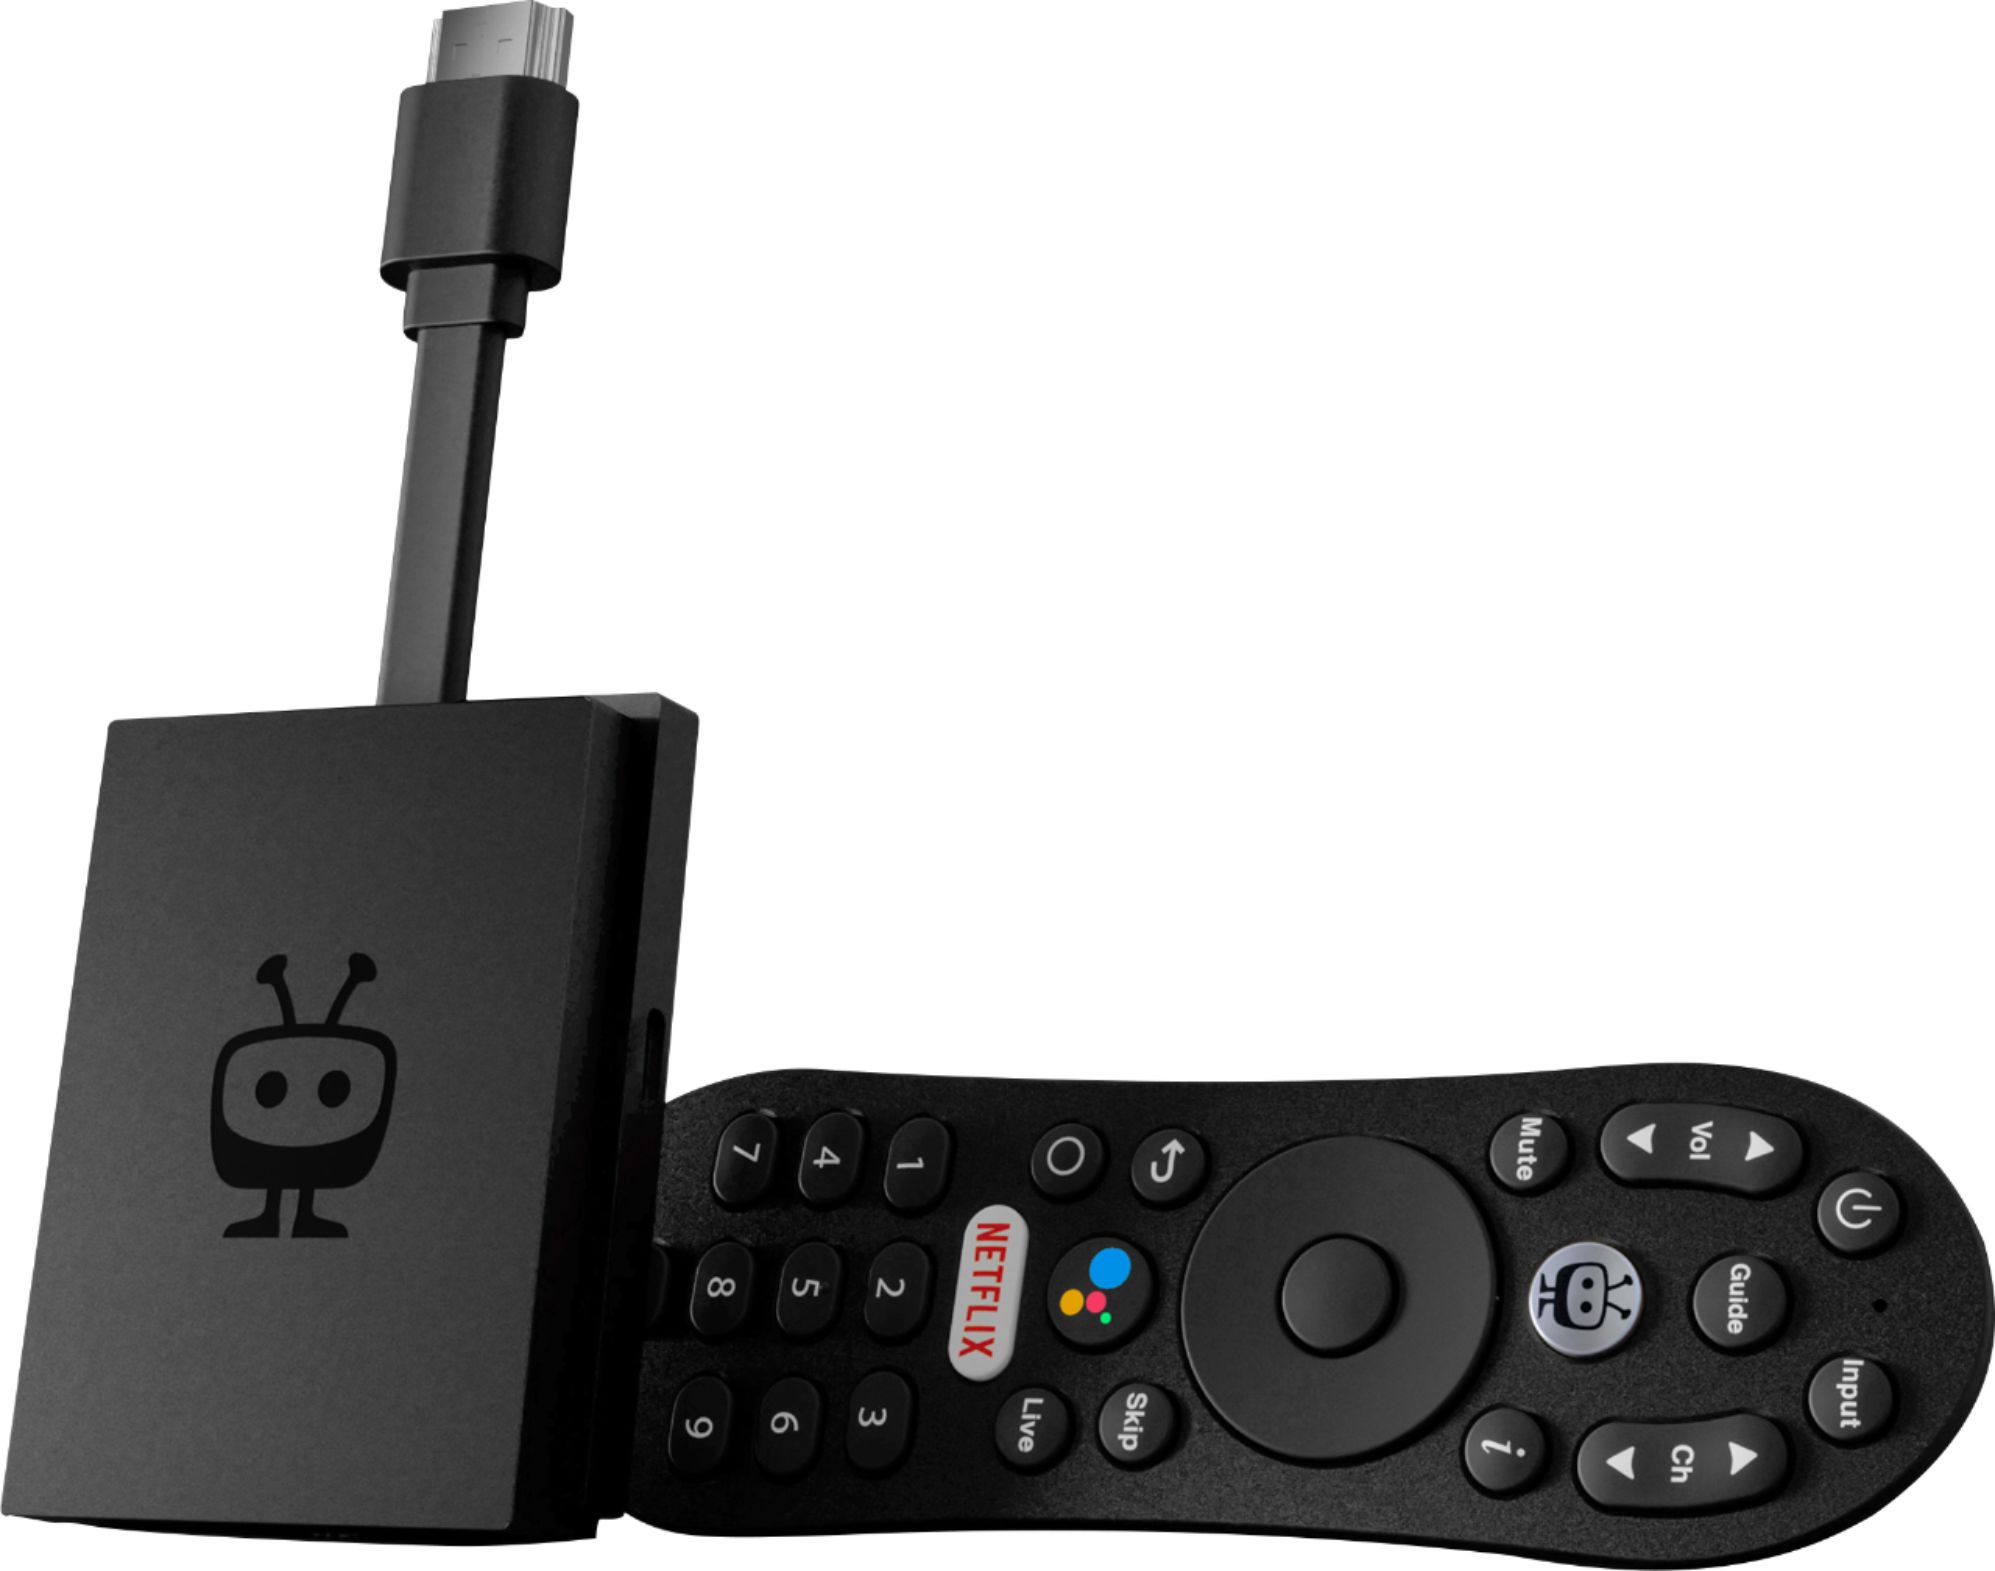 Best 4K HDR / UHD Media Player For Windows 10, Android, iPhone/iPad